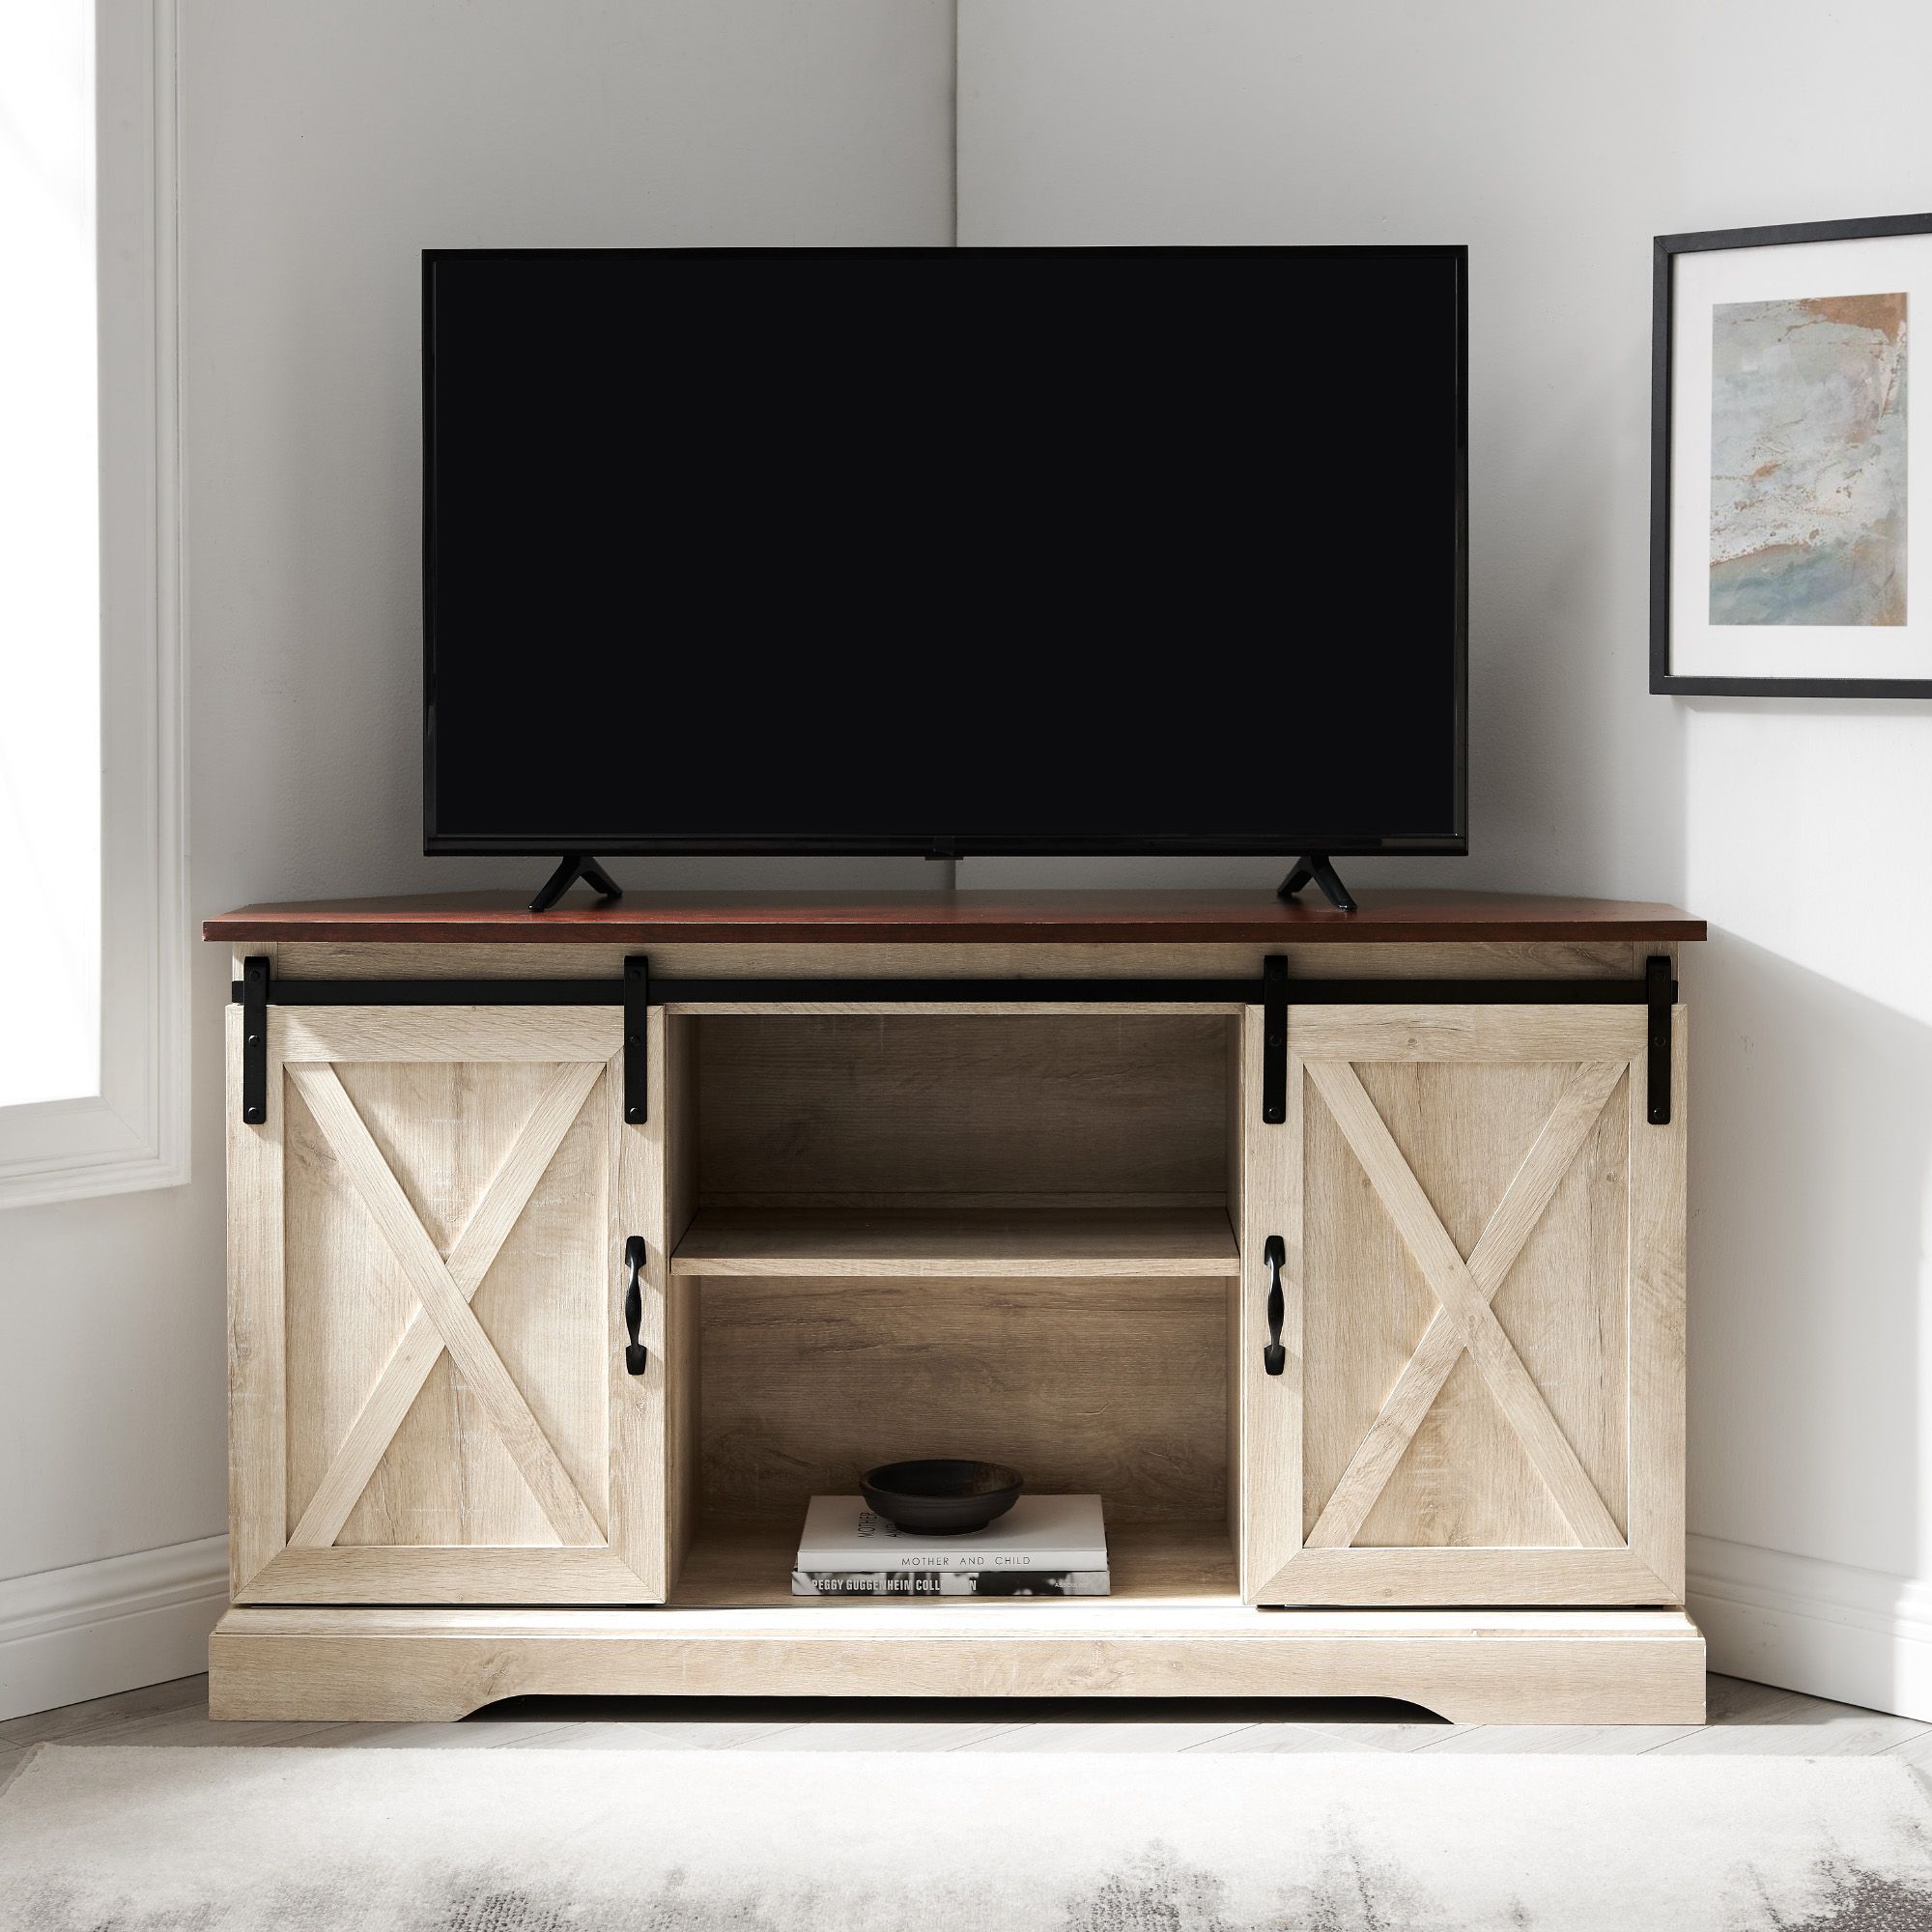 W. Trends 52&quot; Sliding Barn Door Corner TV Stand for TVs Up to 58&quot; - Traditional Brown/White Oak